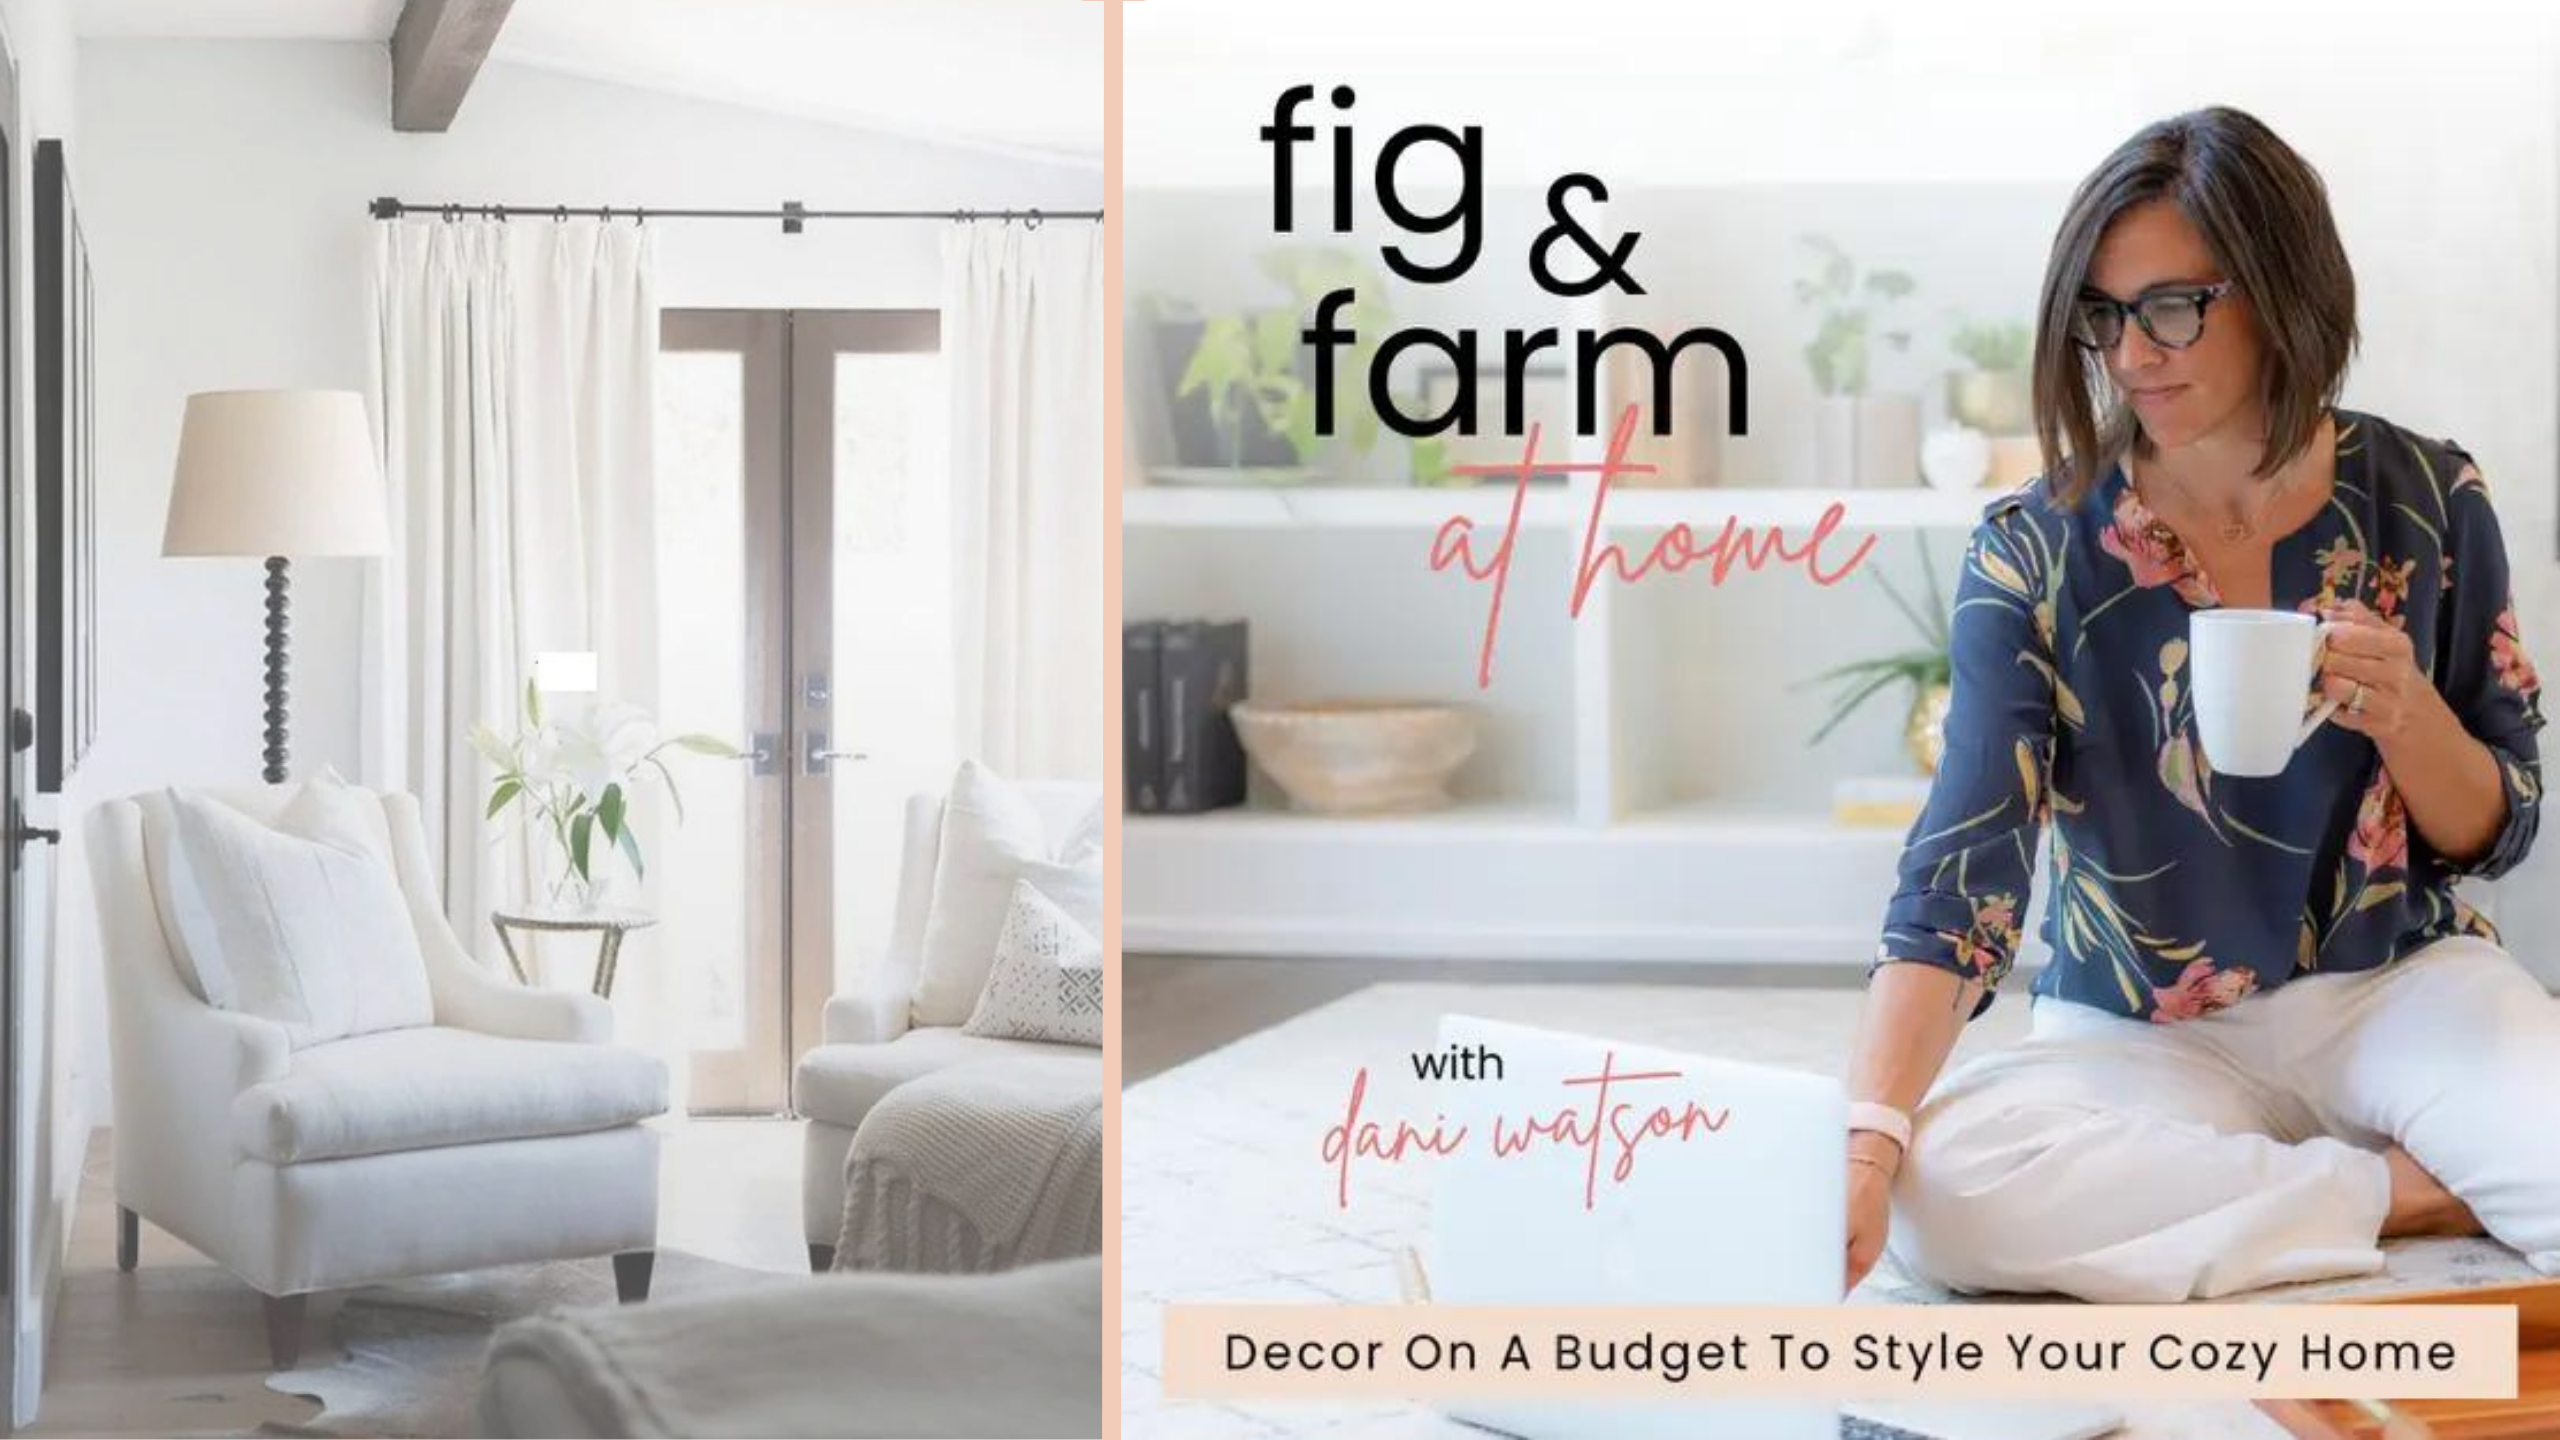 A split image with the words "fig & farm at home with Dani Watson" and "Decor On A Budget To Style Your Cozy Home." On the left is a cozy living space with light furniture and on the right, a woman holding a mug sits on a white wood floor.